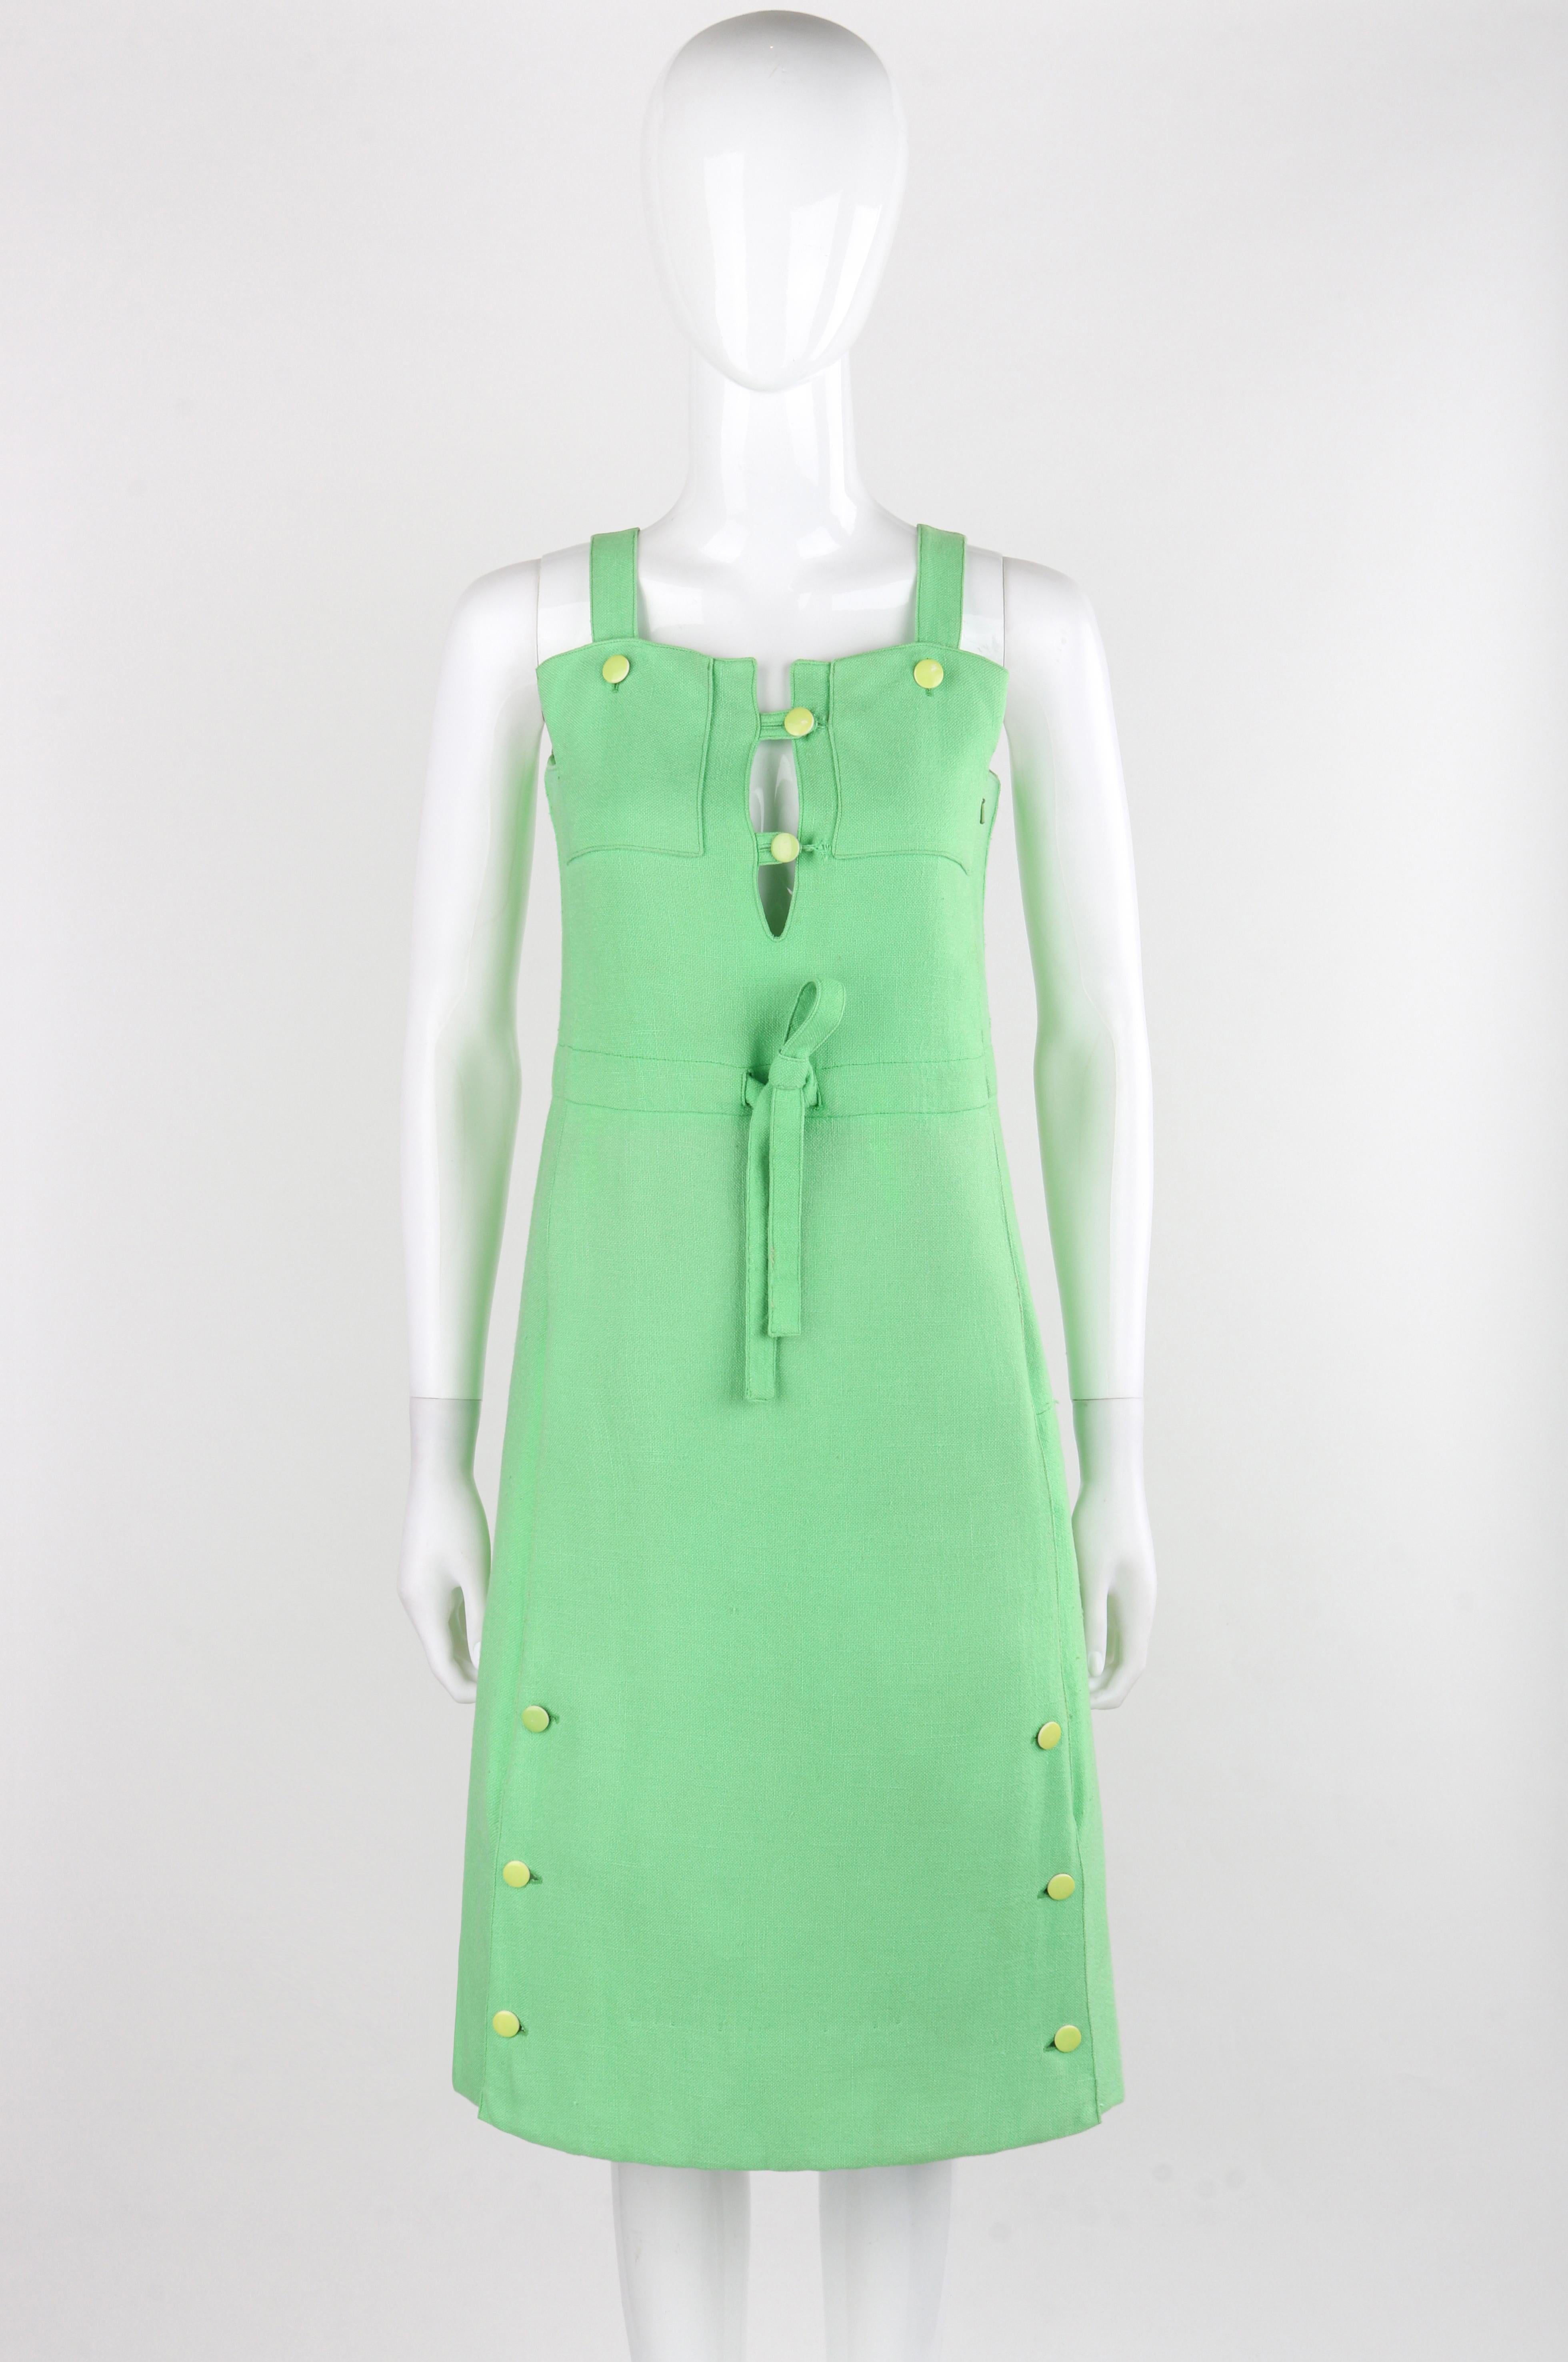 COURREGES Paris c.1960's Vtg Mint Green Tie Front Overall Midi Day Dress

Brand / Manufacturer: Courreges Paris
Circa: 1960's
Designer: Andre Courreges
Style: Overall Day Dress
Color(s): Green (exterior), White (interior)
Lined: Yes
Marked Fabric: